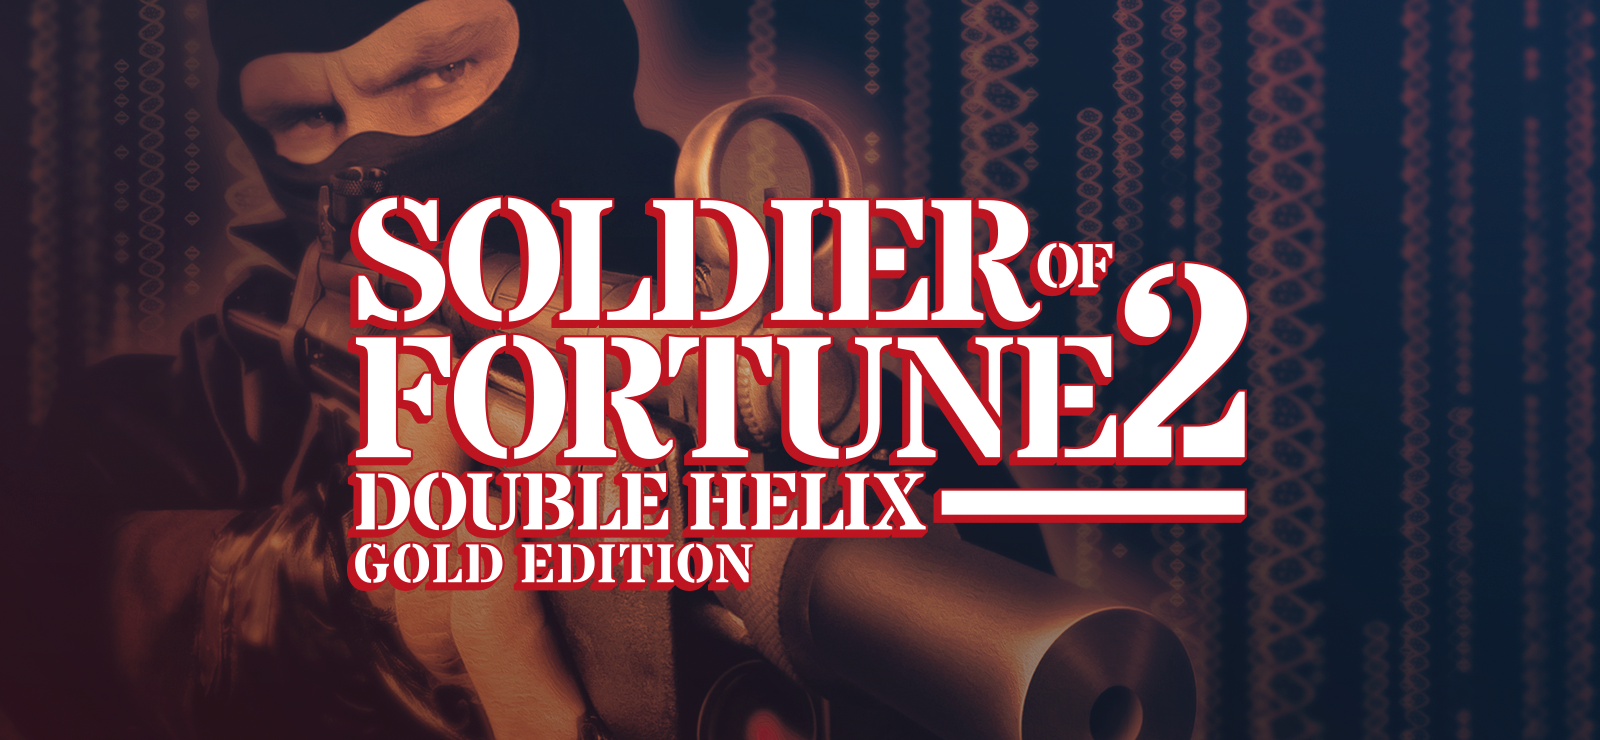 BESTSELLER - Soldier Of Fortune II: Double Helix - Gold Edition